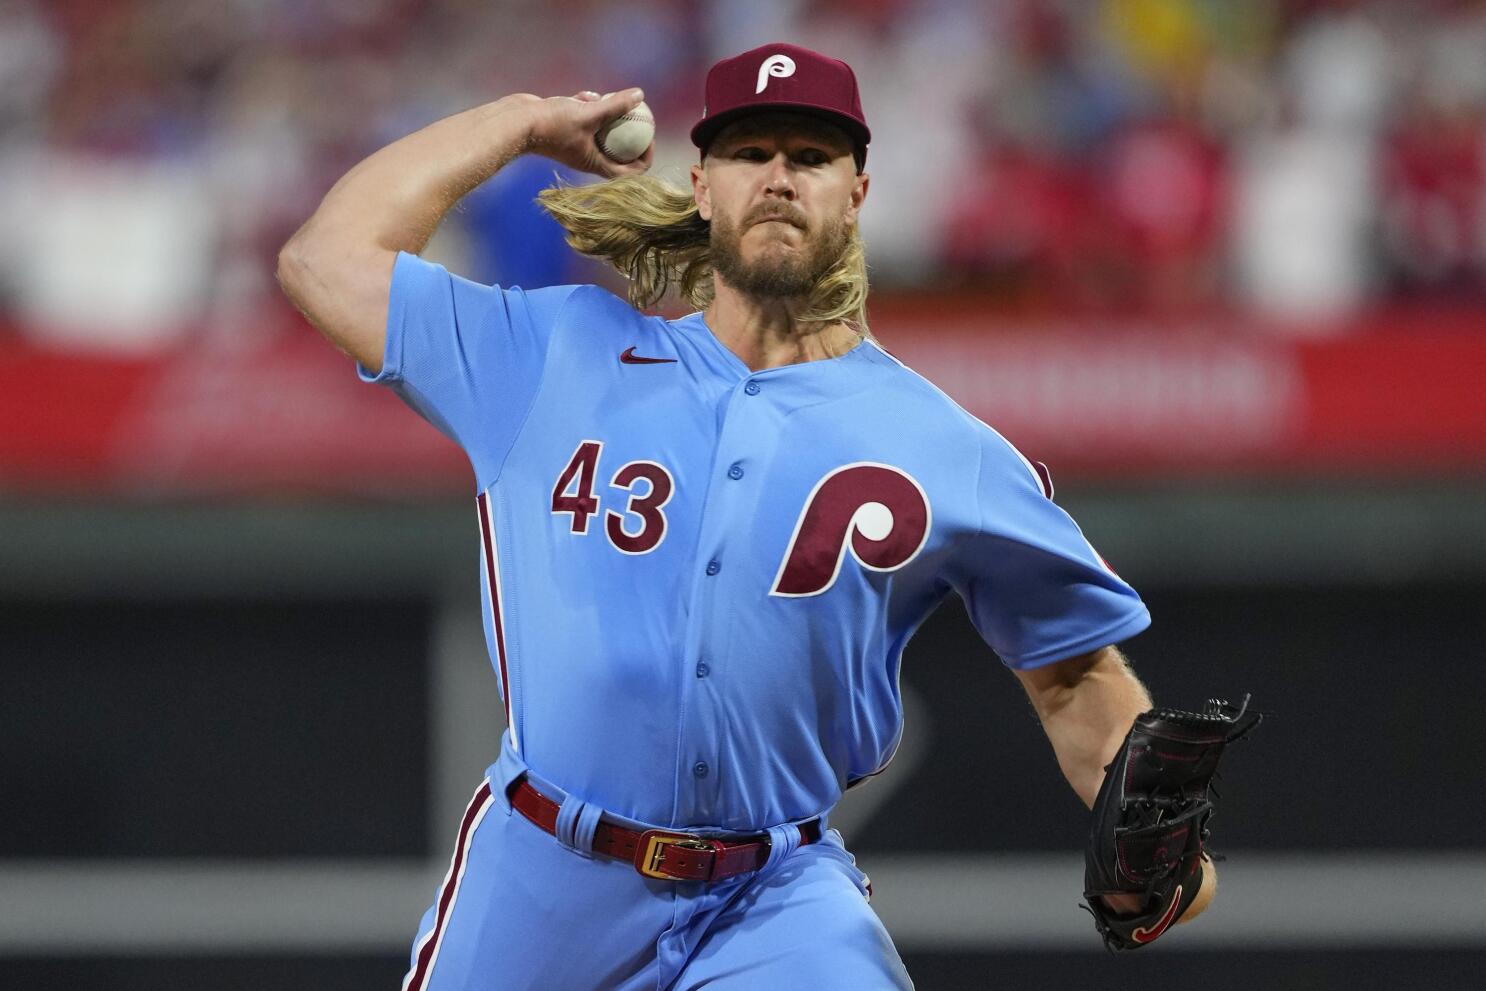 Noah Syndergaard gaining much more confidence with the Phillies